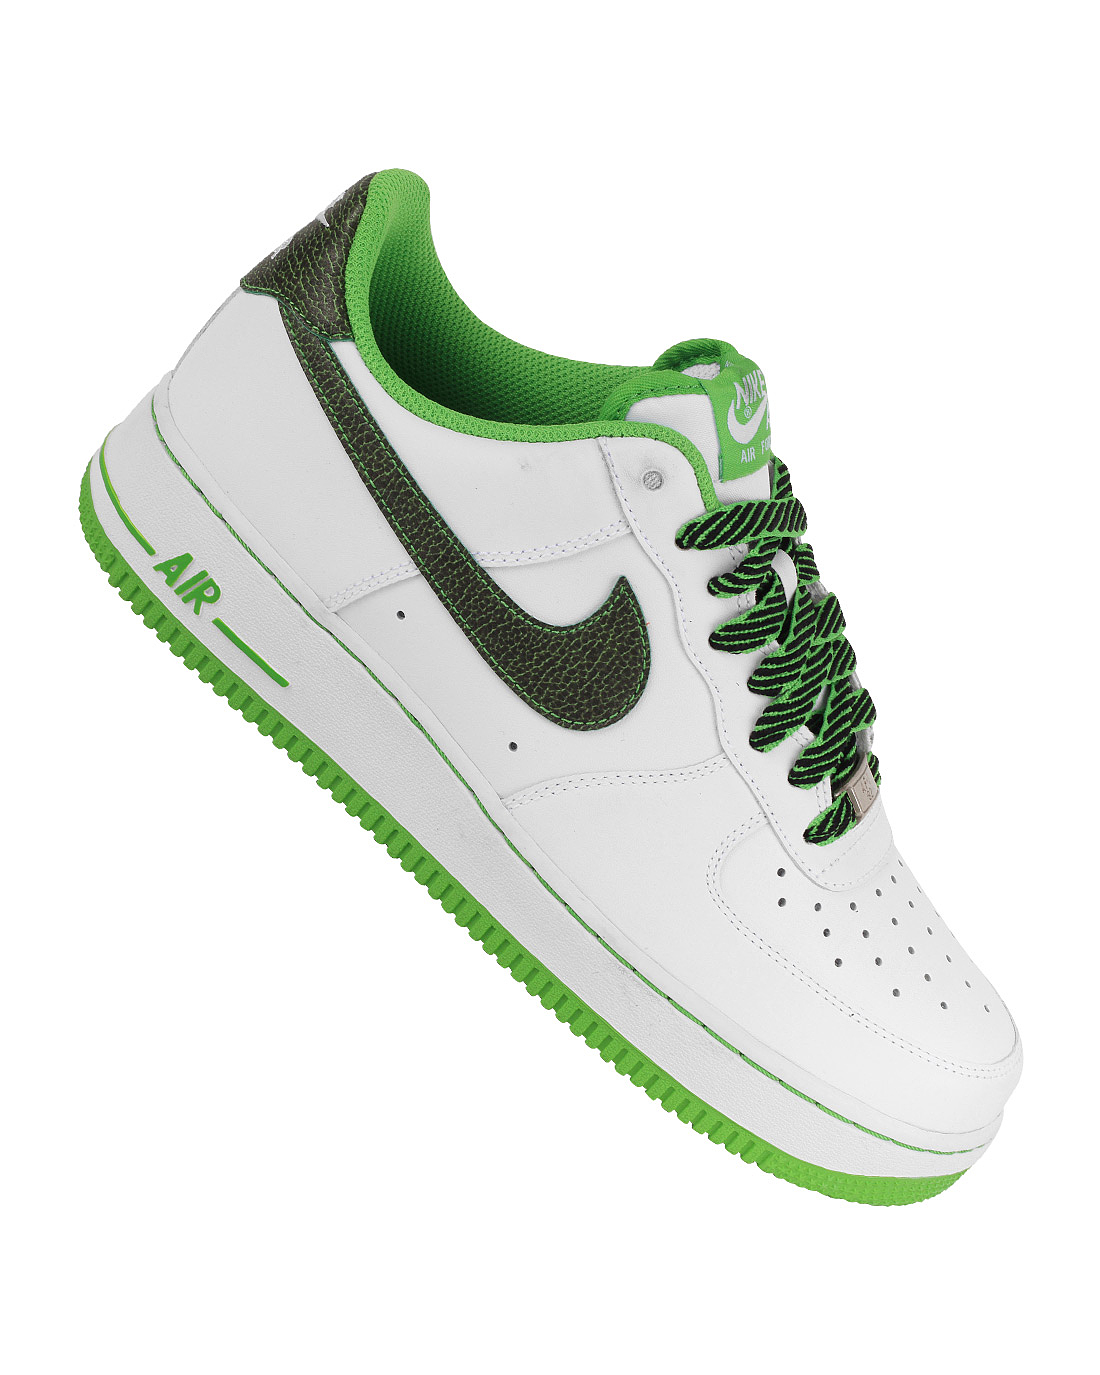 nike air force 1 hombre verde